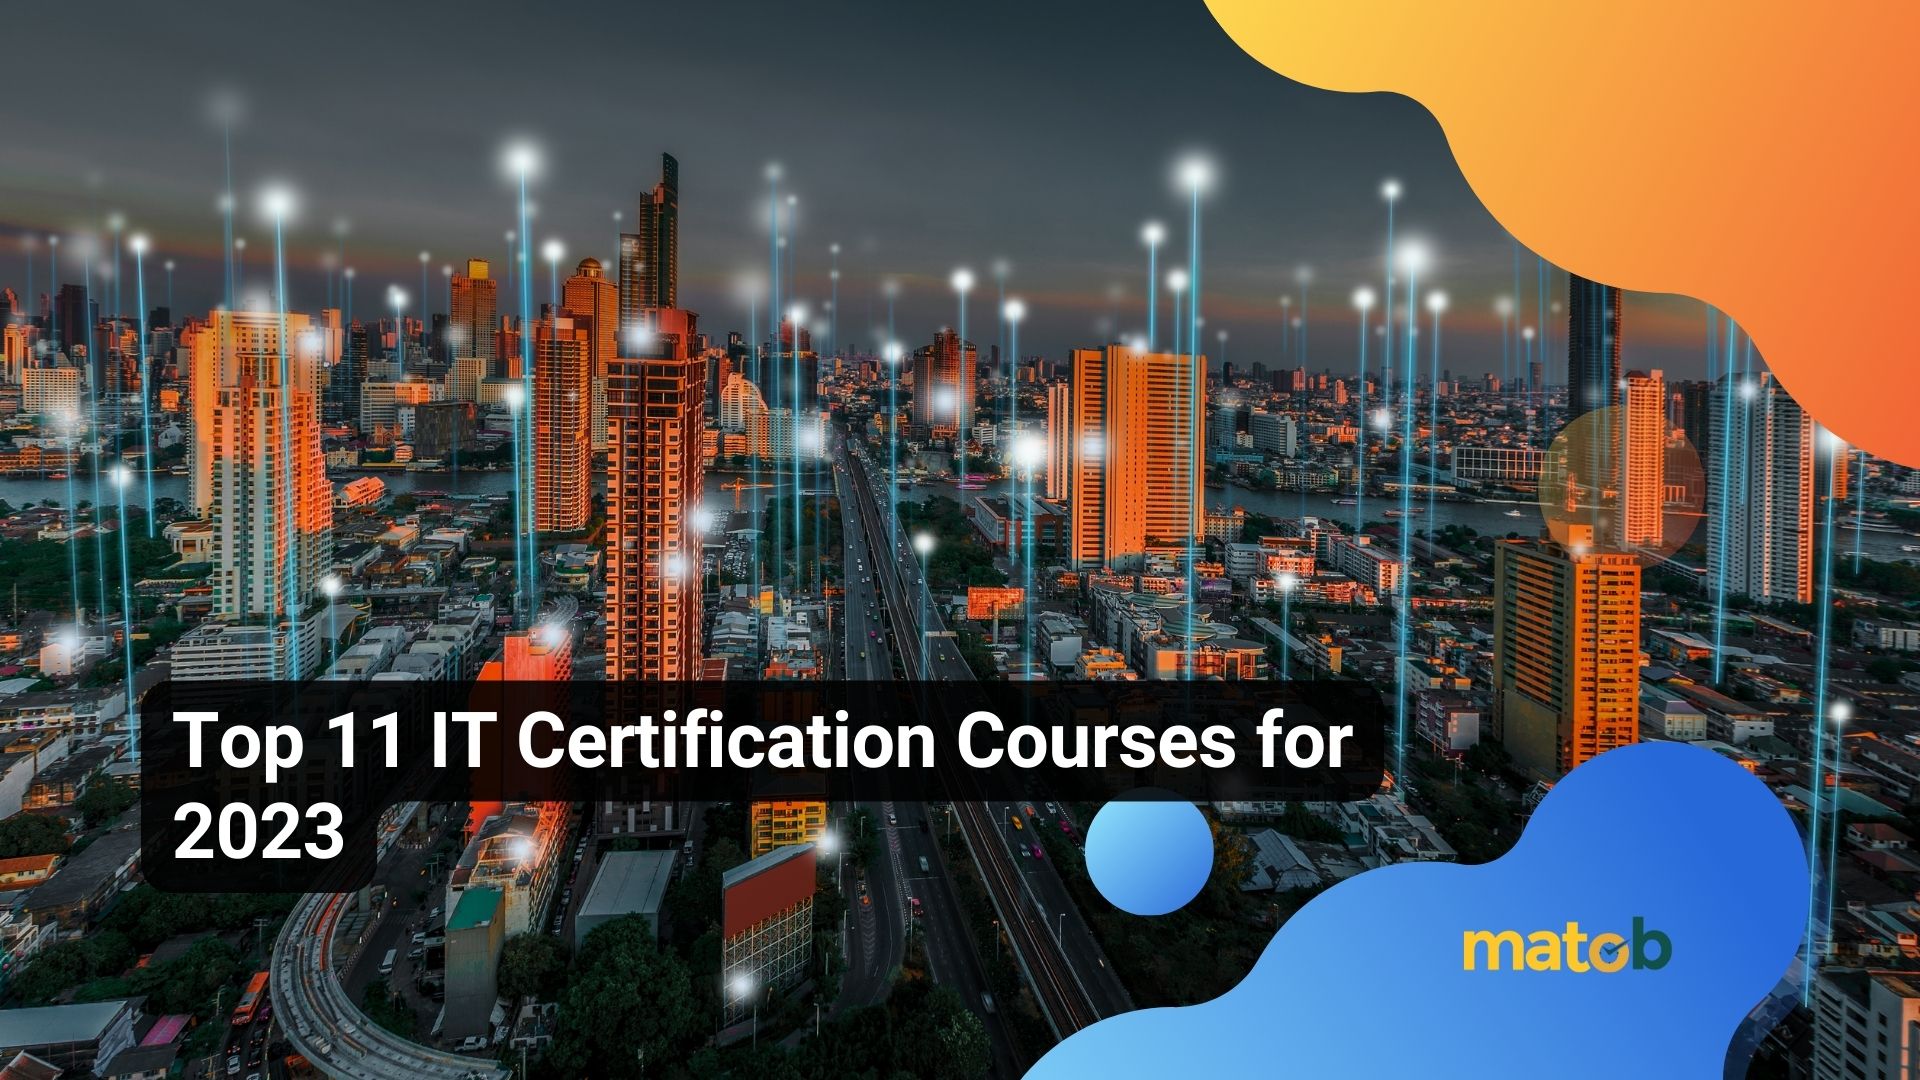 Top 11 IT Certification Courses for 2023